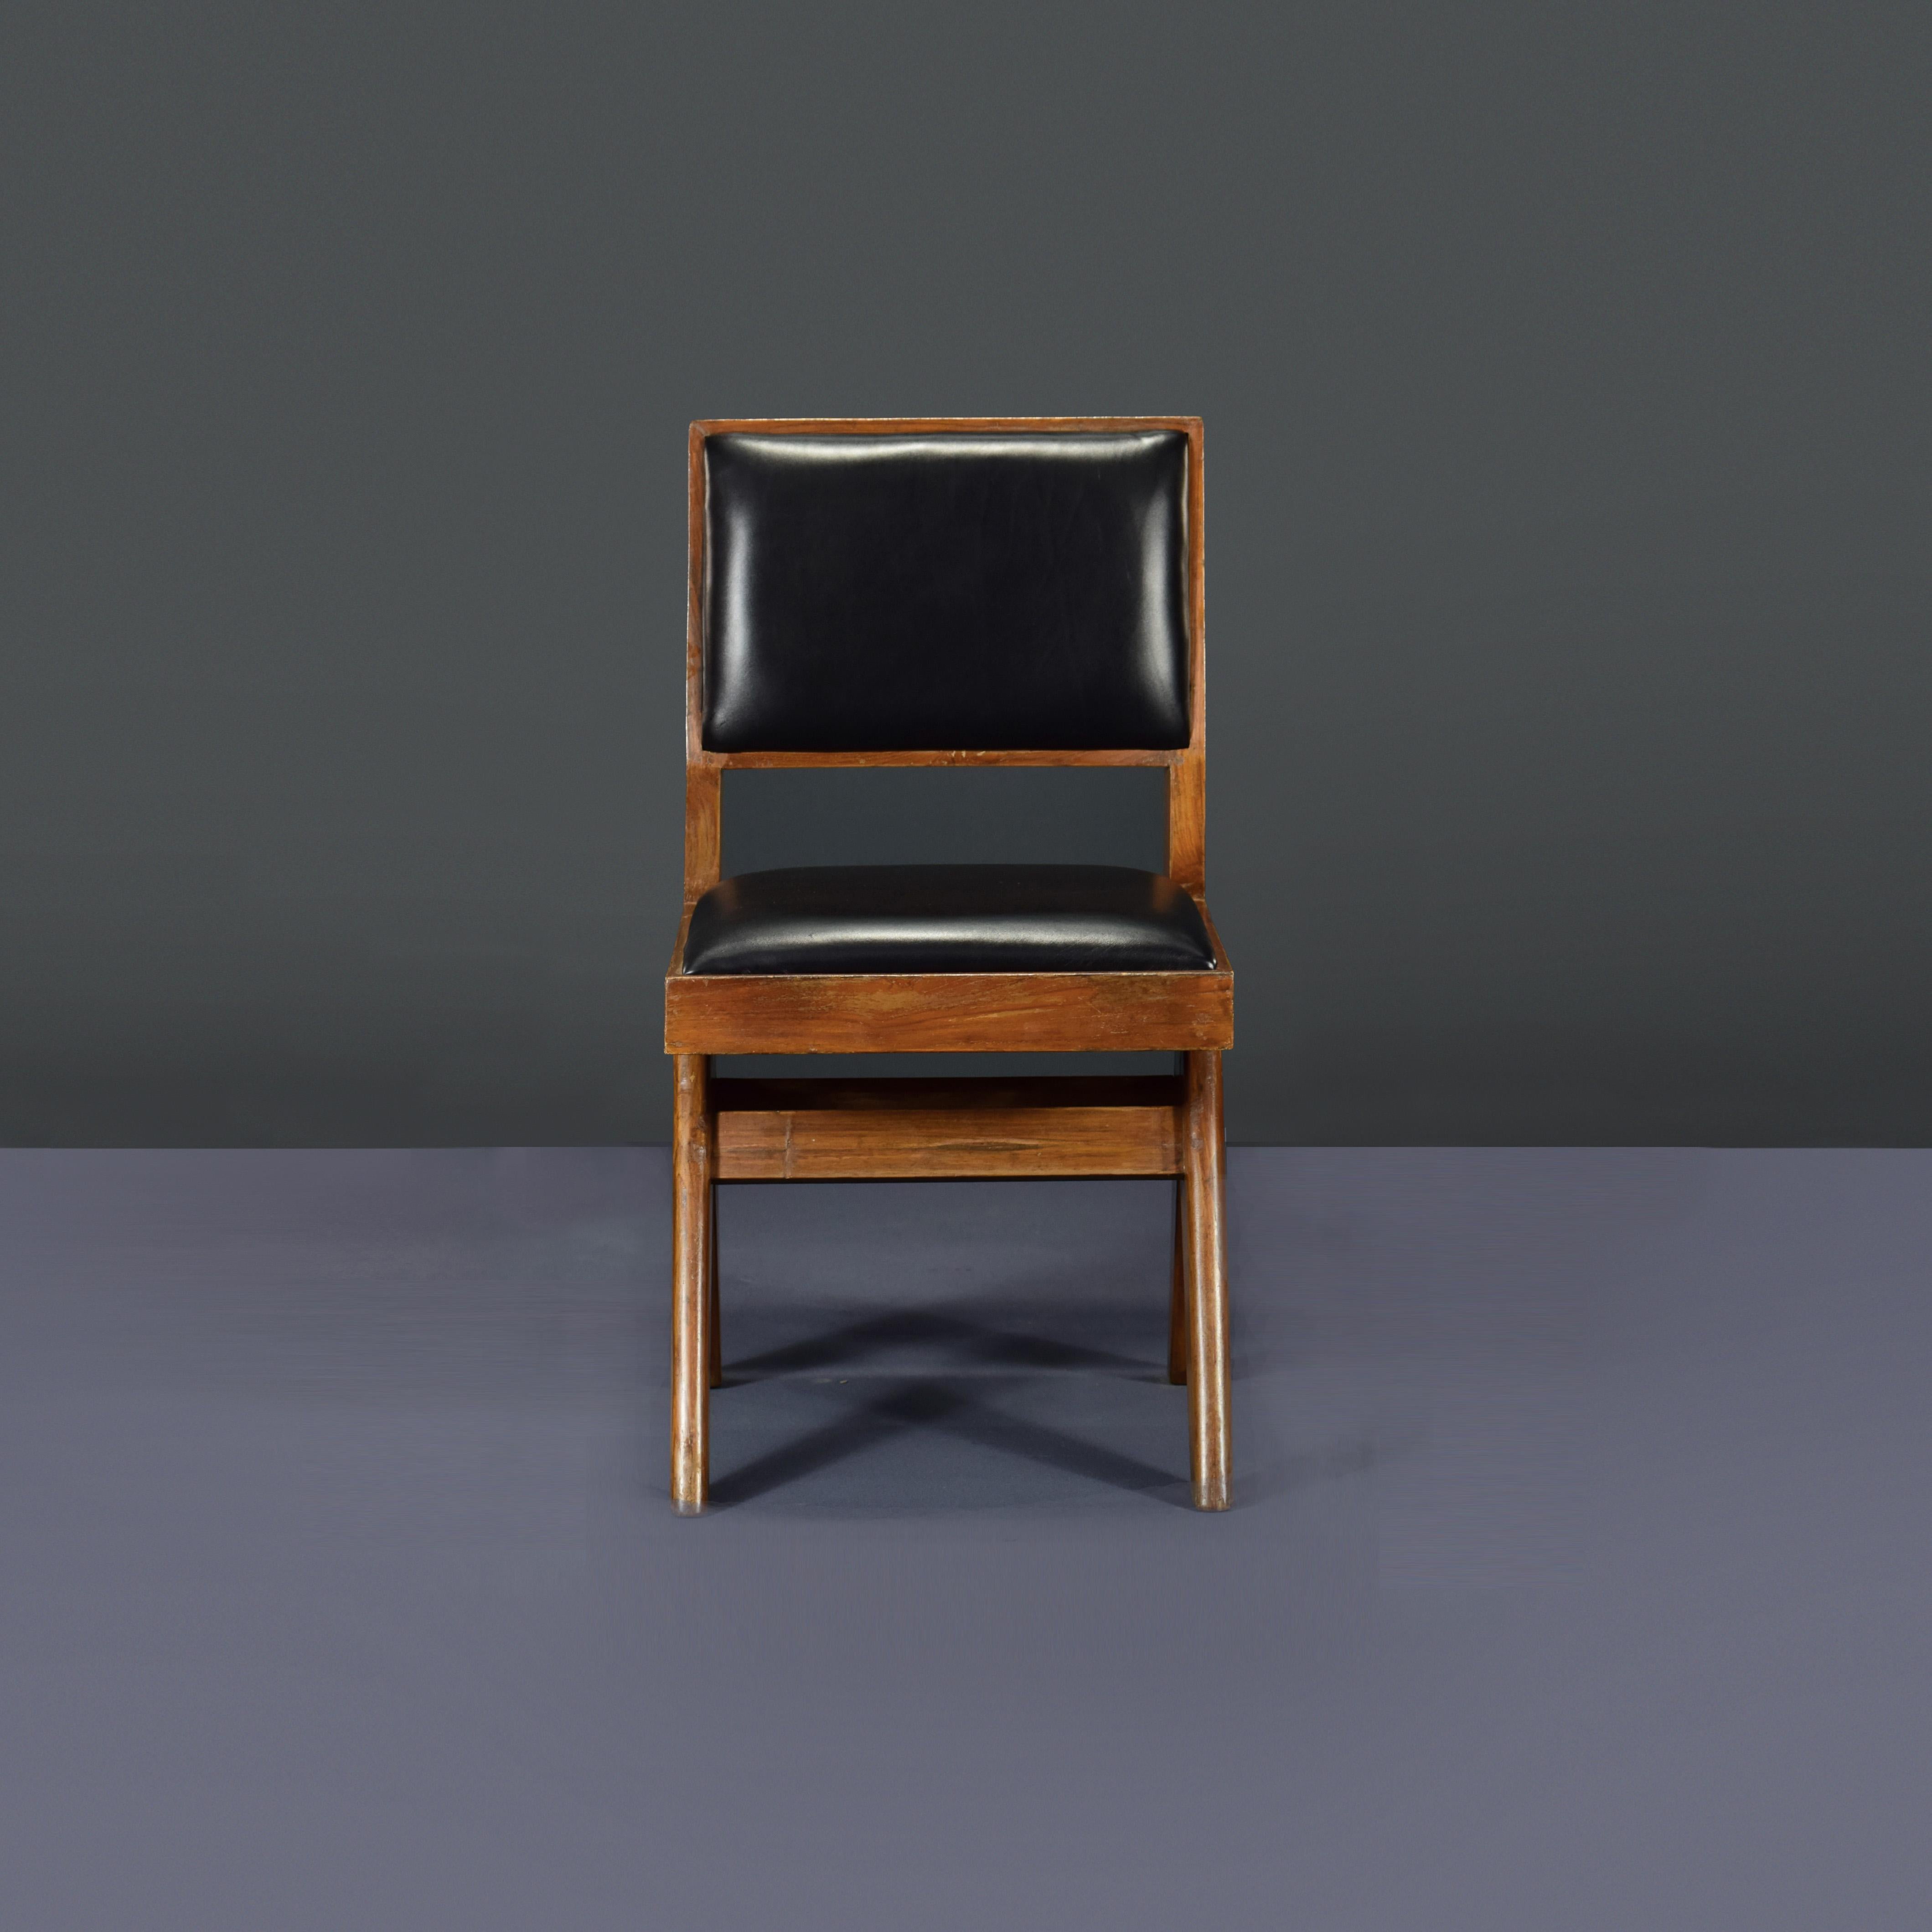 This chair is a very rare student chair with upholstery. Finally, it's iconic. It appears so simple and yet so precise, where proportions seems to be perfect. This A-shaped legs are typical for Chandigarh objects. Then this l-shaped seat, where the